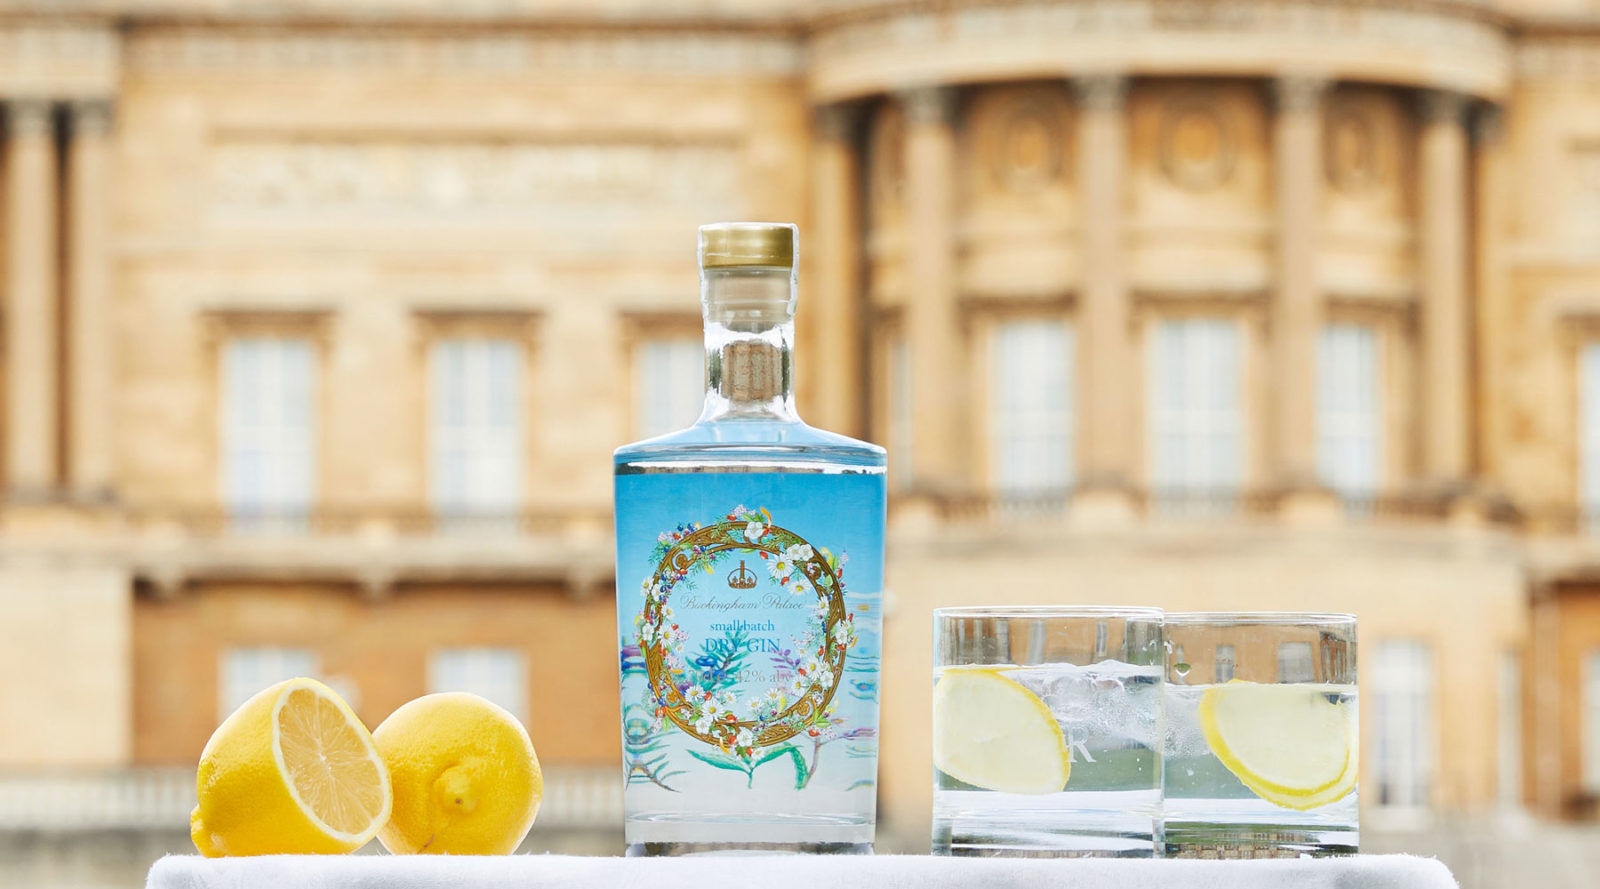 This British gin is crafted from Queen Elizabeth II’s own backyard